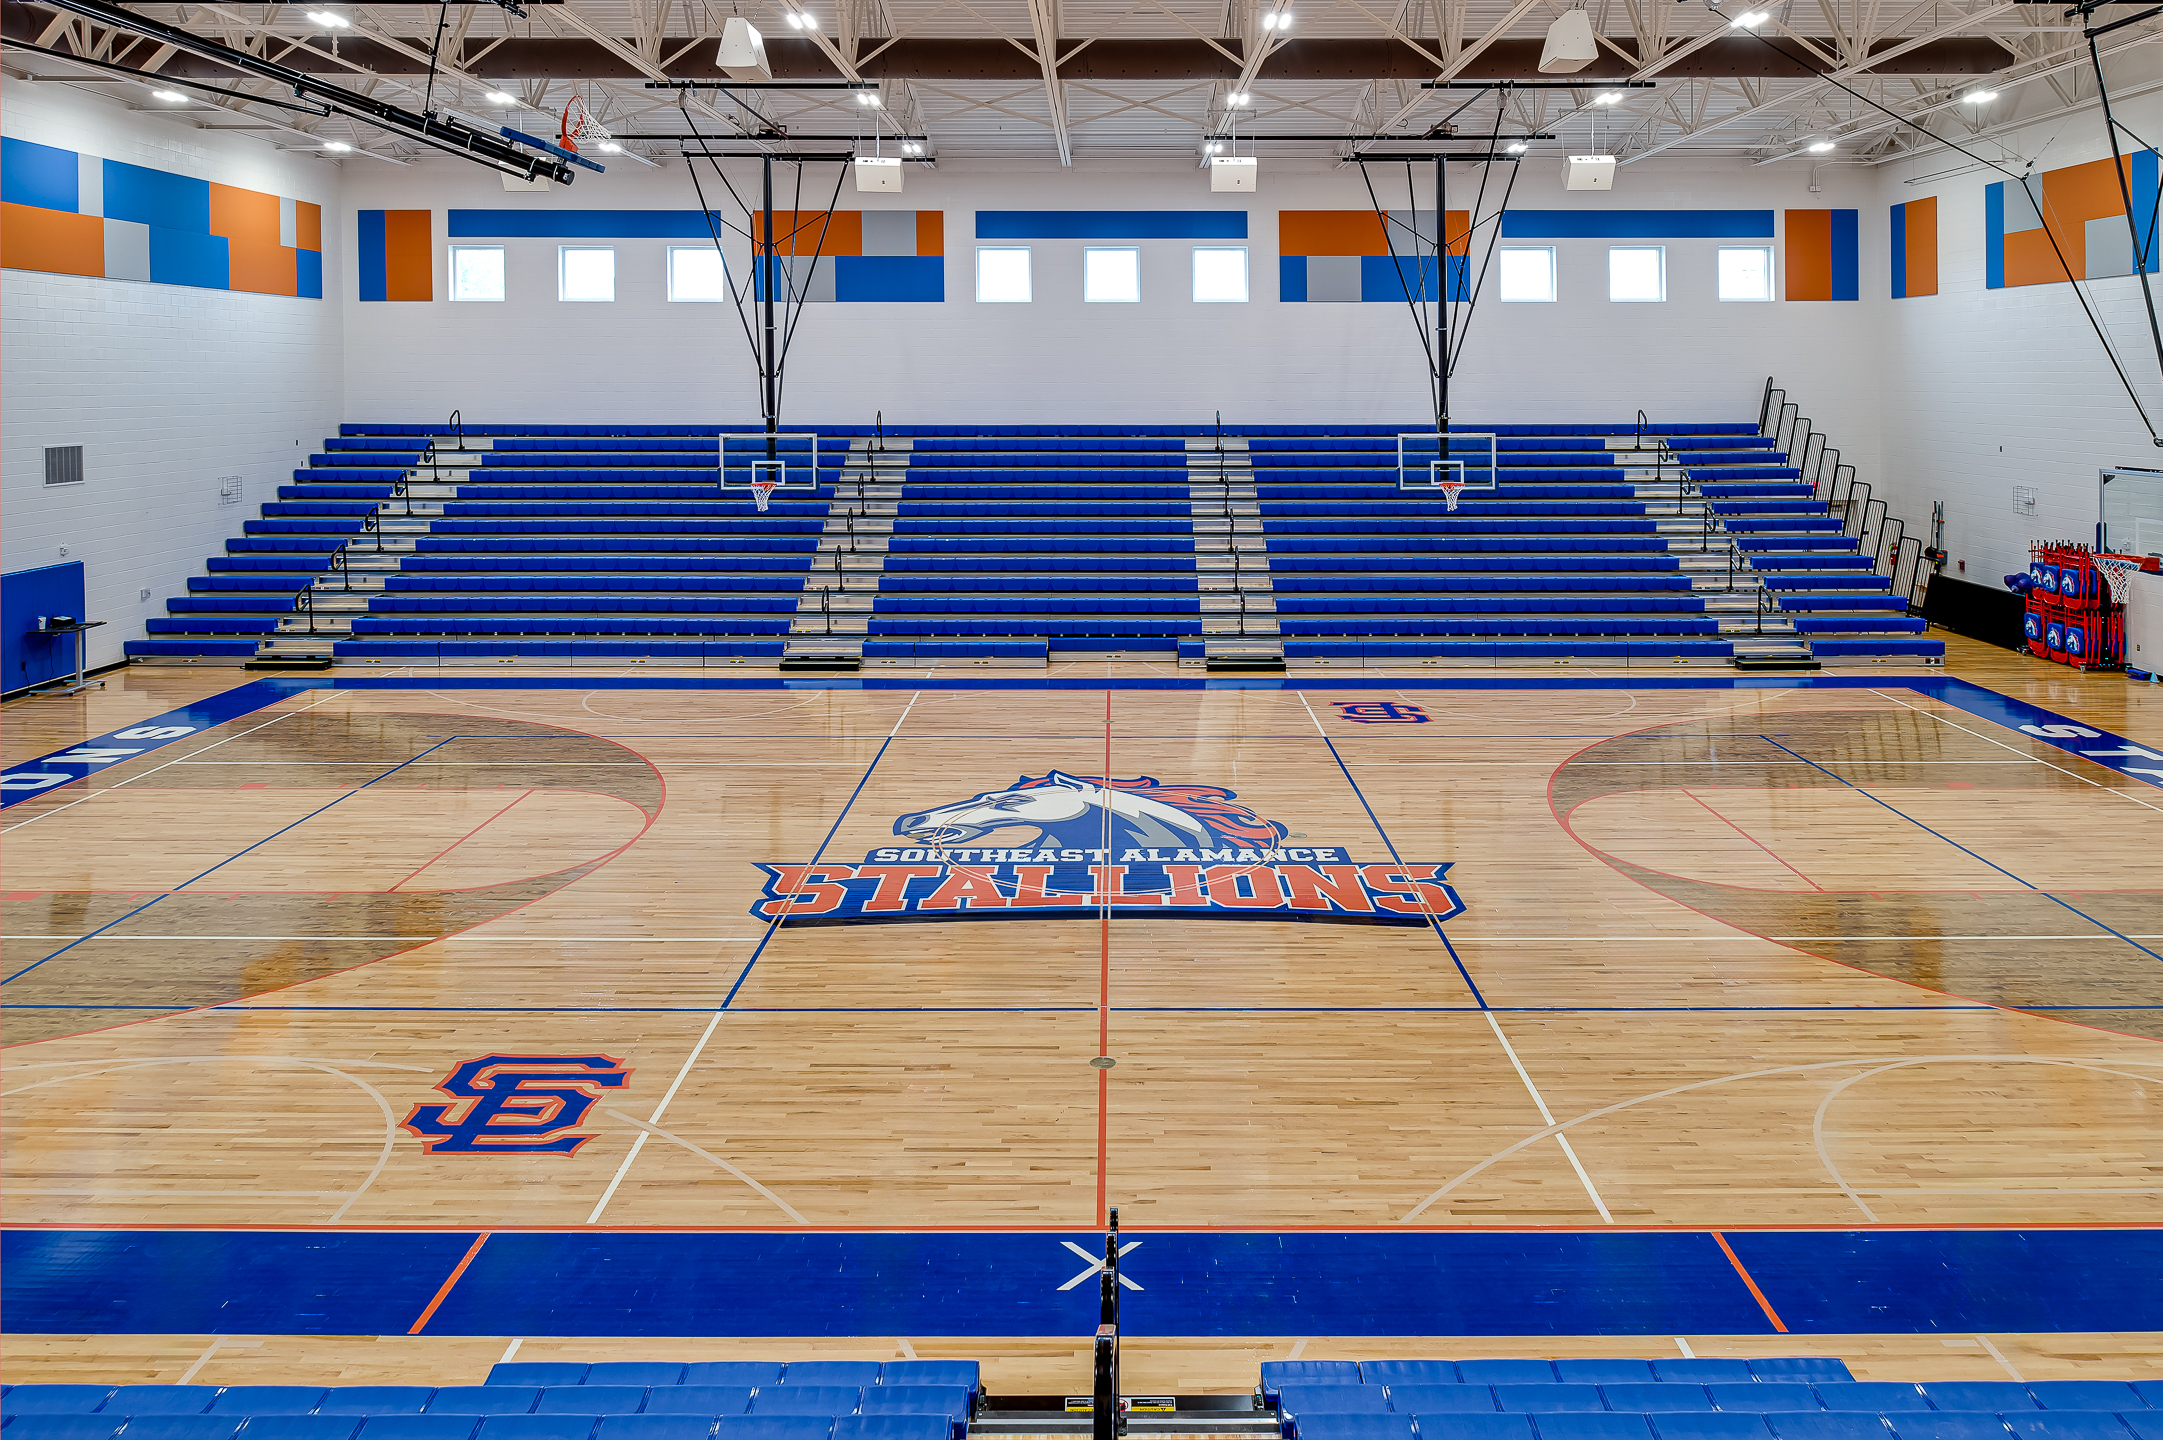 An interior design photographer captures a basketball court's blue and orange seats in North Carolina.